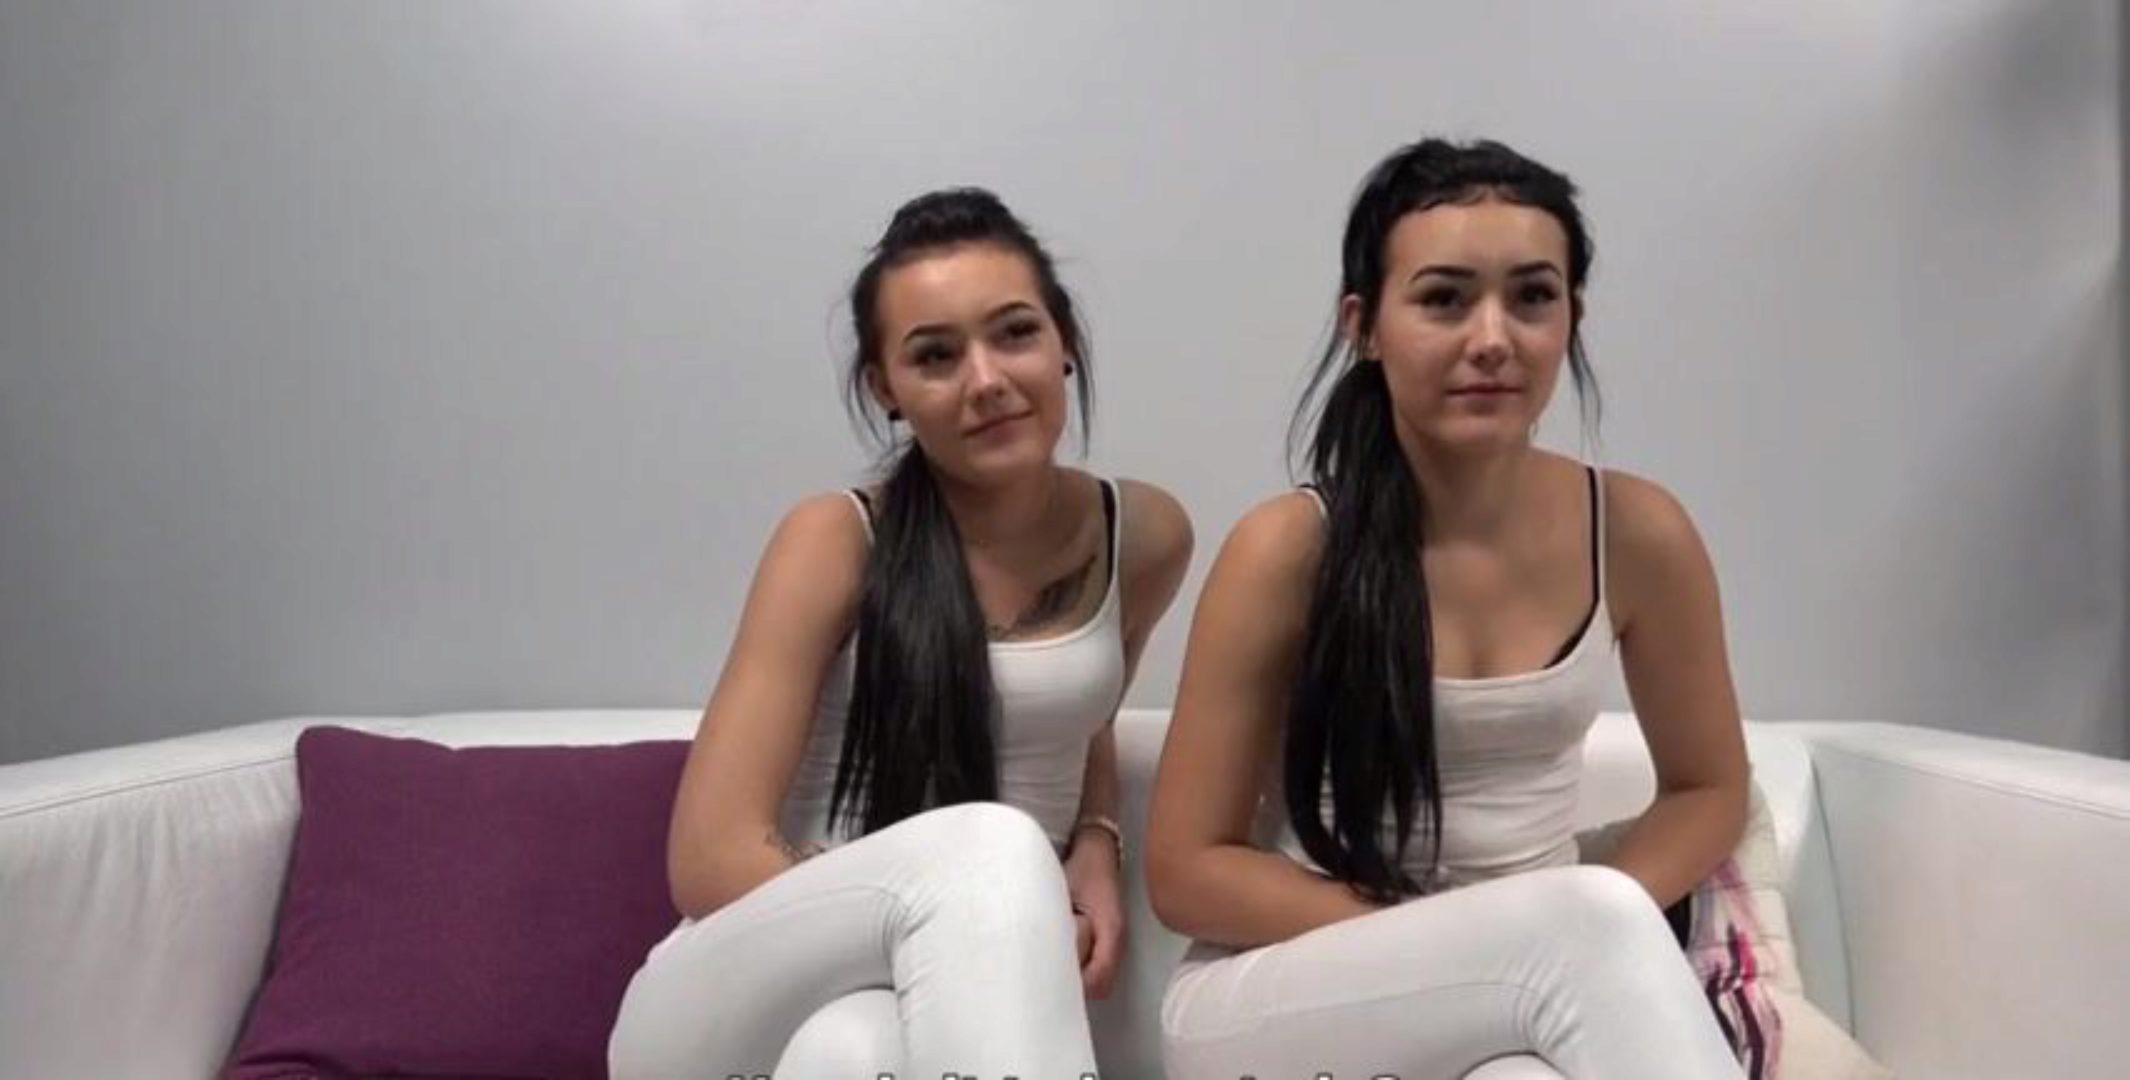 Mature Chinese Porn Twins - Lesbian Identical Twin Sisters The Jolie Twins - XVDS TV